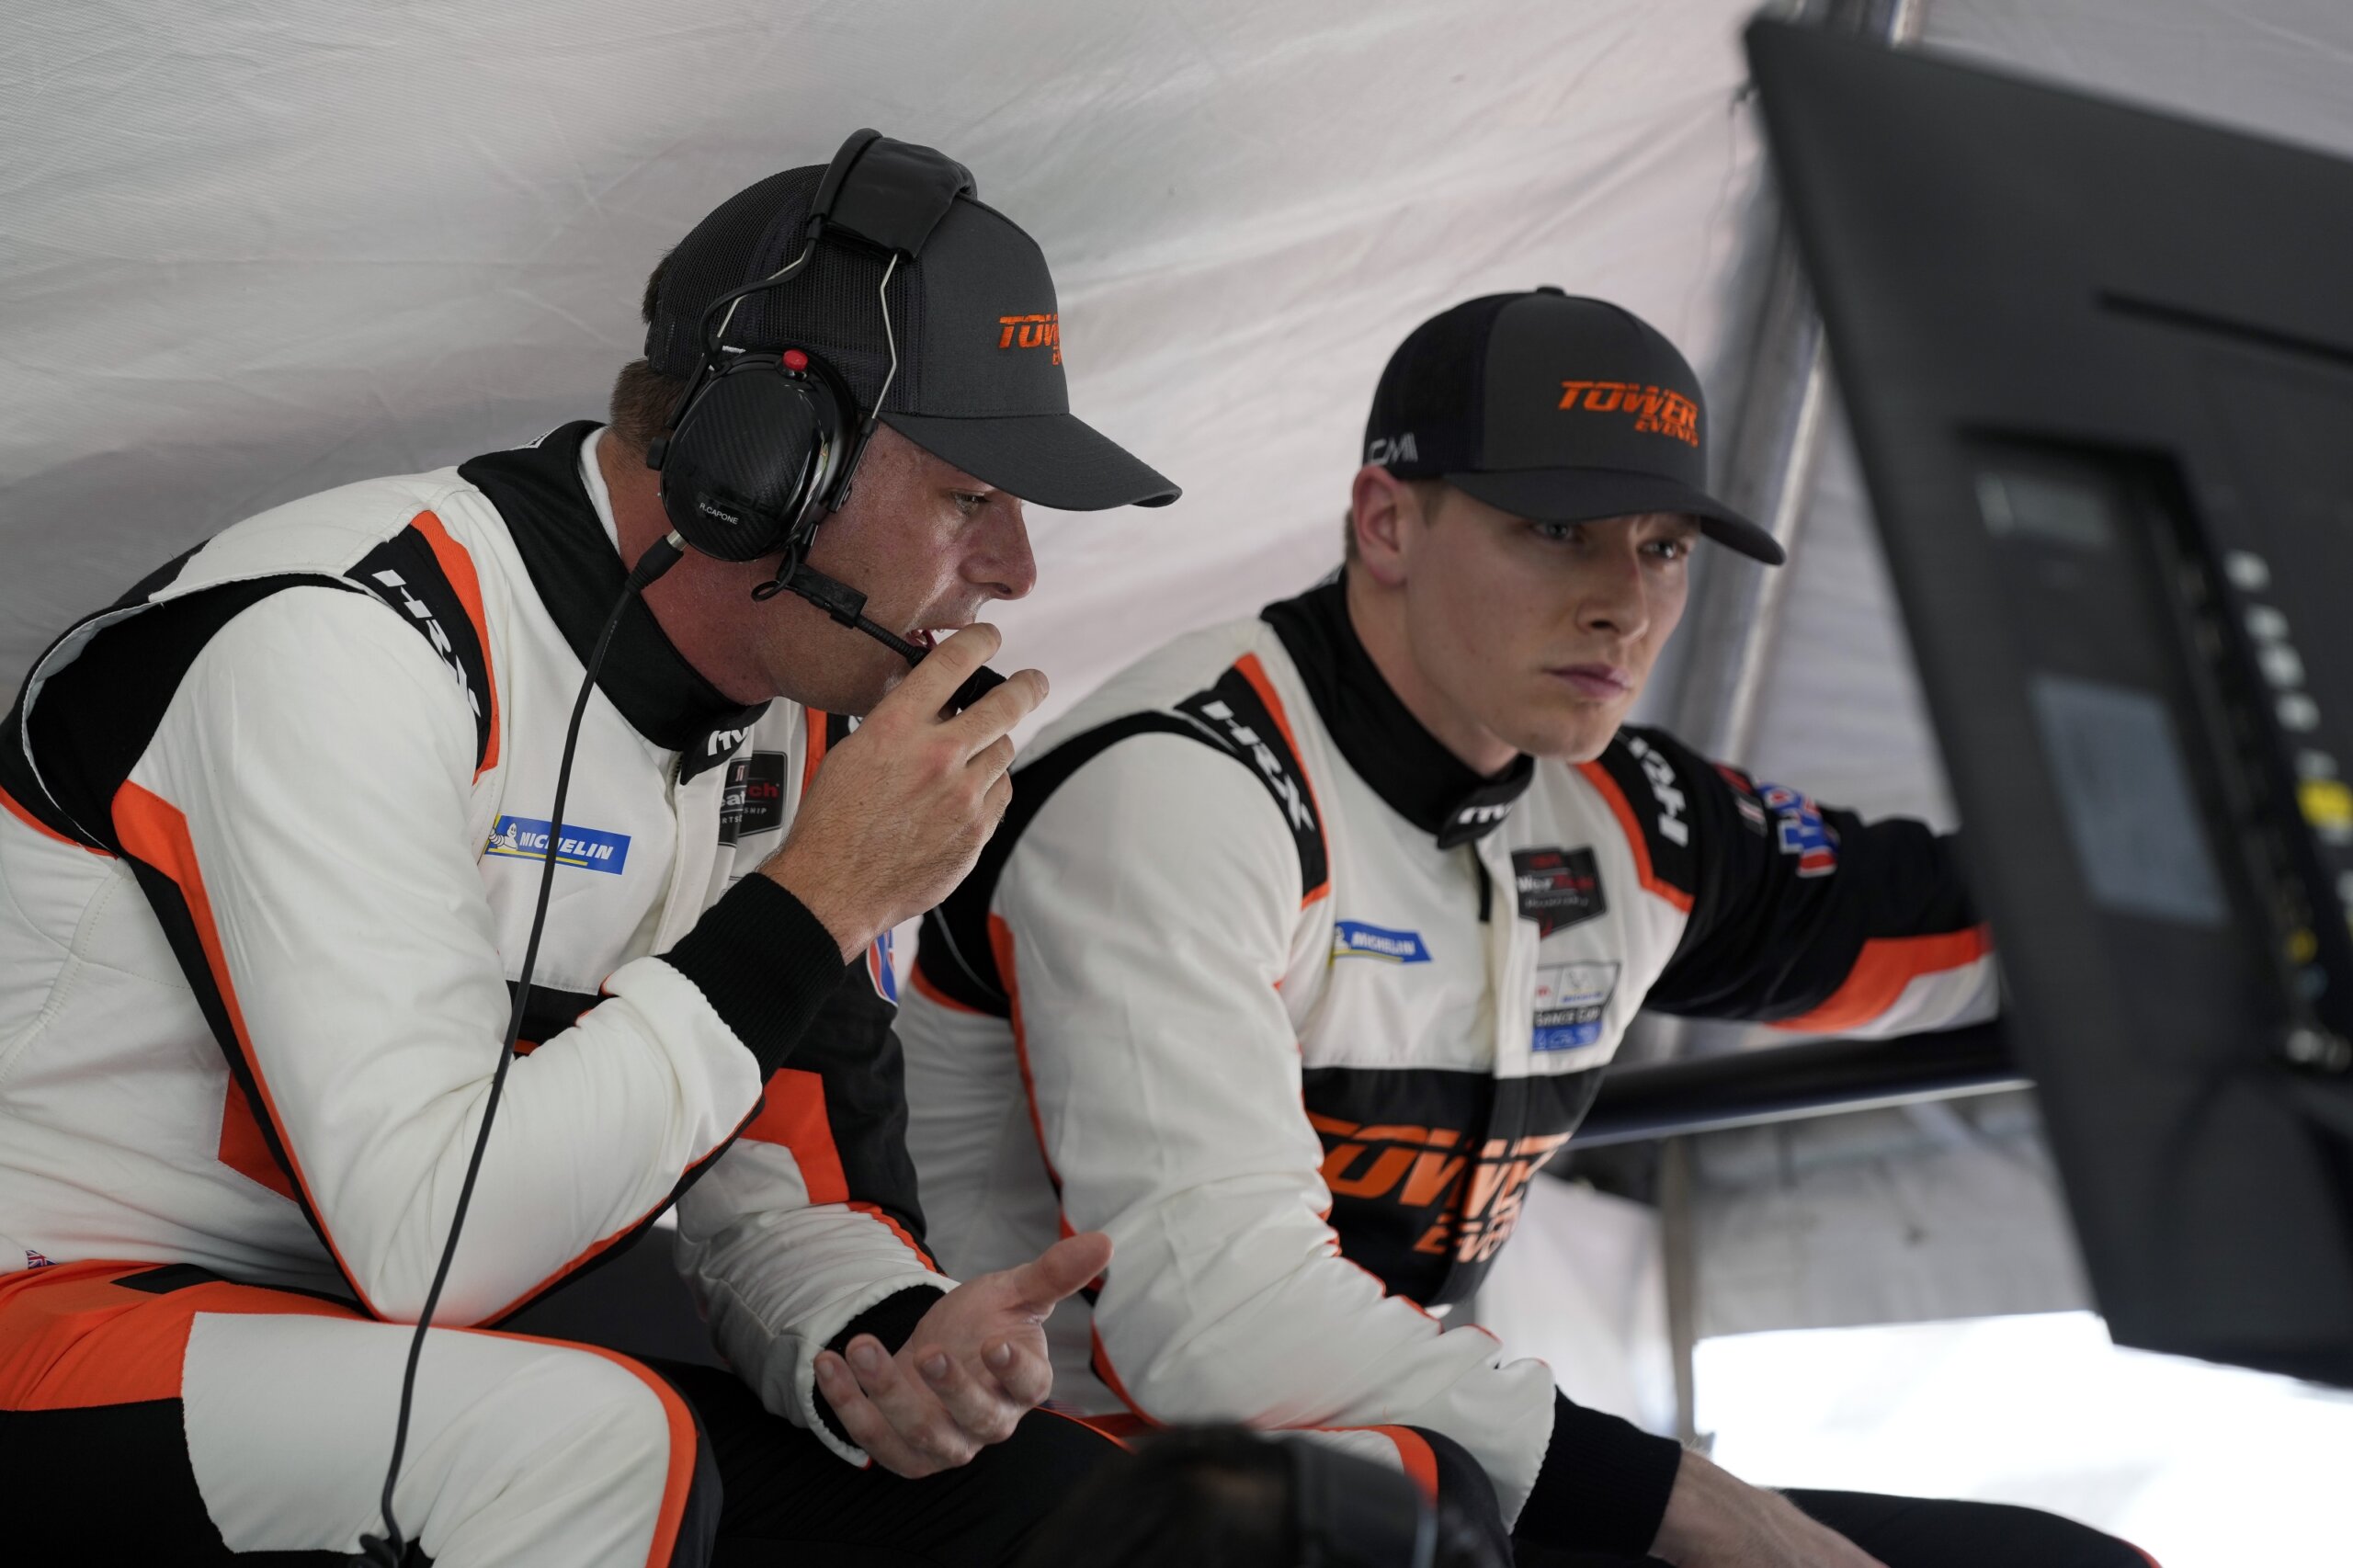 Bus Bros. have early disappointment at Rolex 24 at Daytona